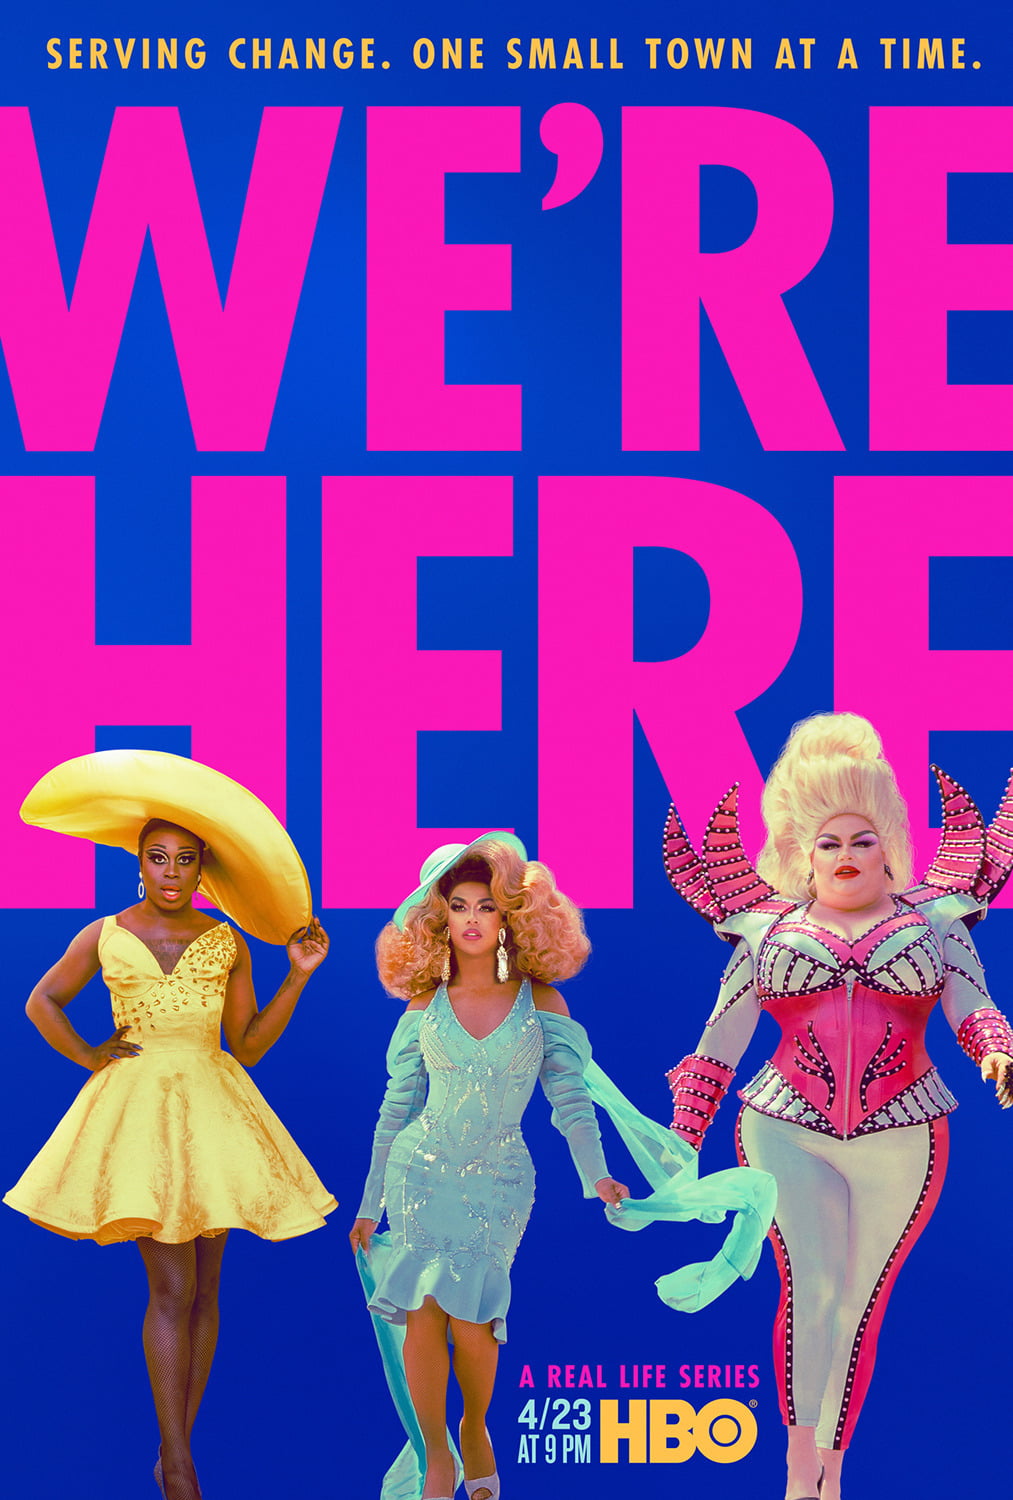 We're Here Tv Series 2022, Official Trailer, Release Date